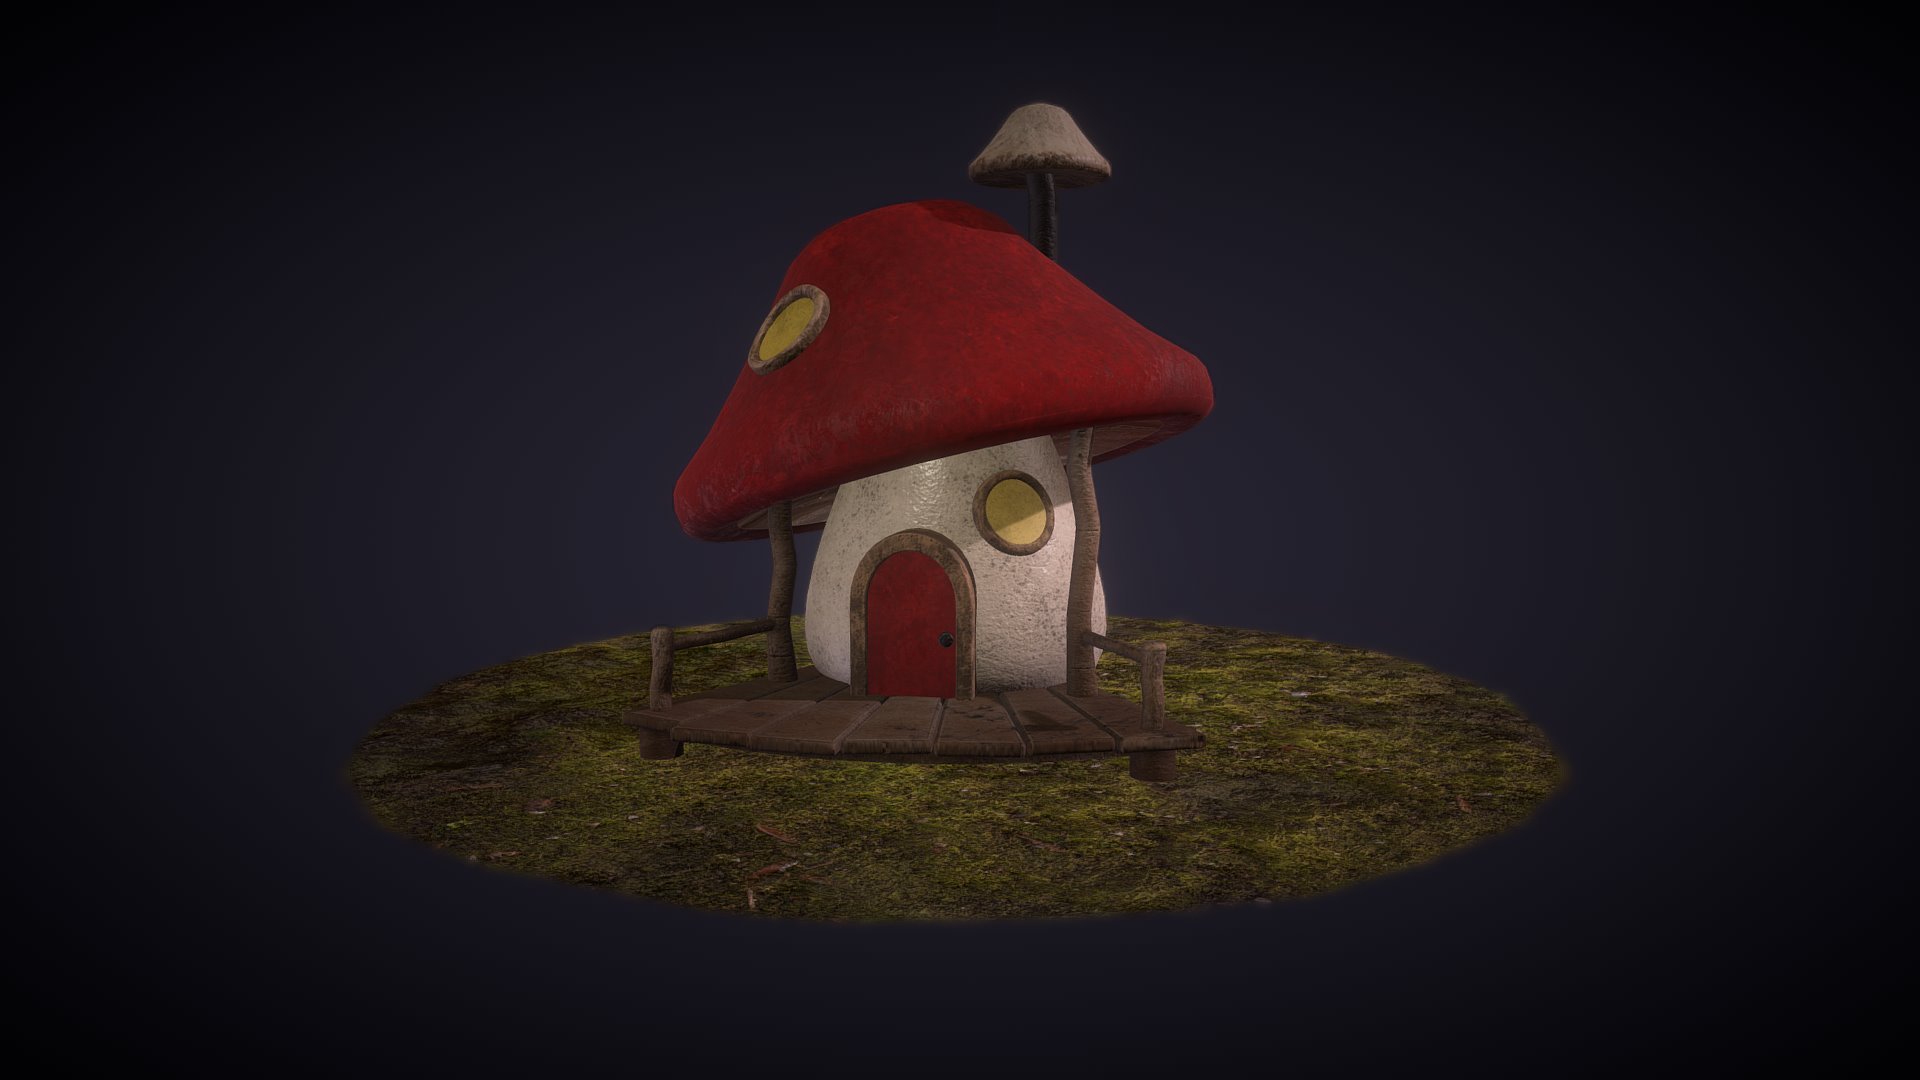 My second 3D model after my stylized church school project. Mushroom house is modeled in C4D, UV mapped in Maya, and textured in Substance Painter. I am still a newbee at this and find it important to keep on practicing to explore more techniques. I am also new with UV mapping and faced many challenges. The most important here is to keep on learning and getting better 3d model